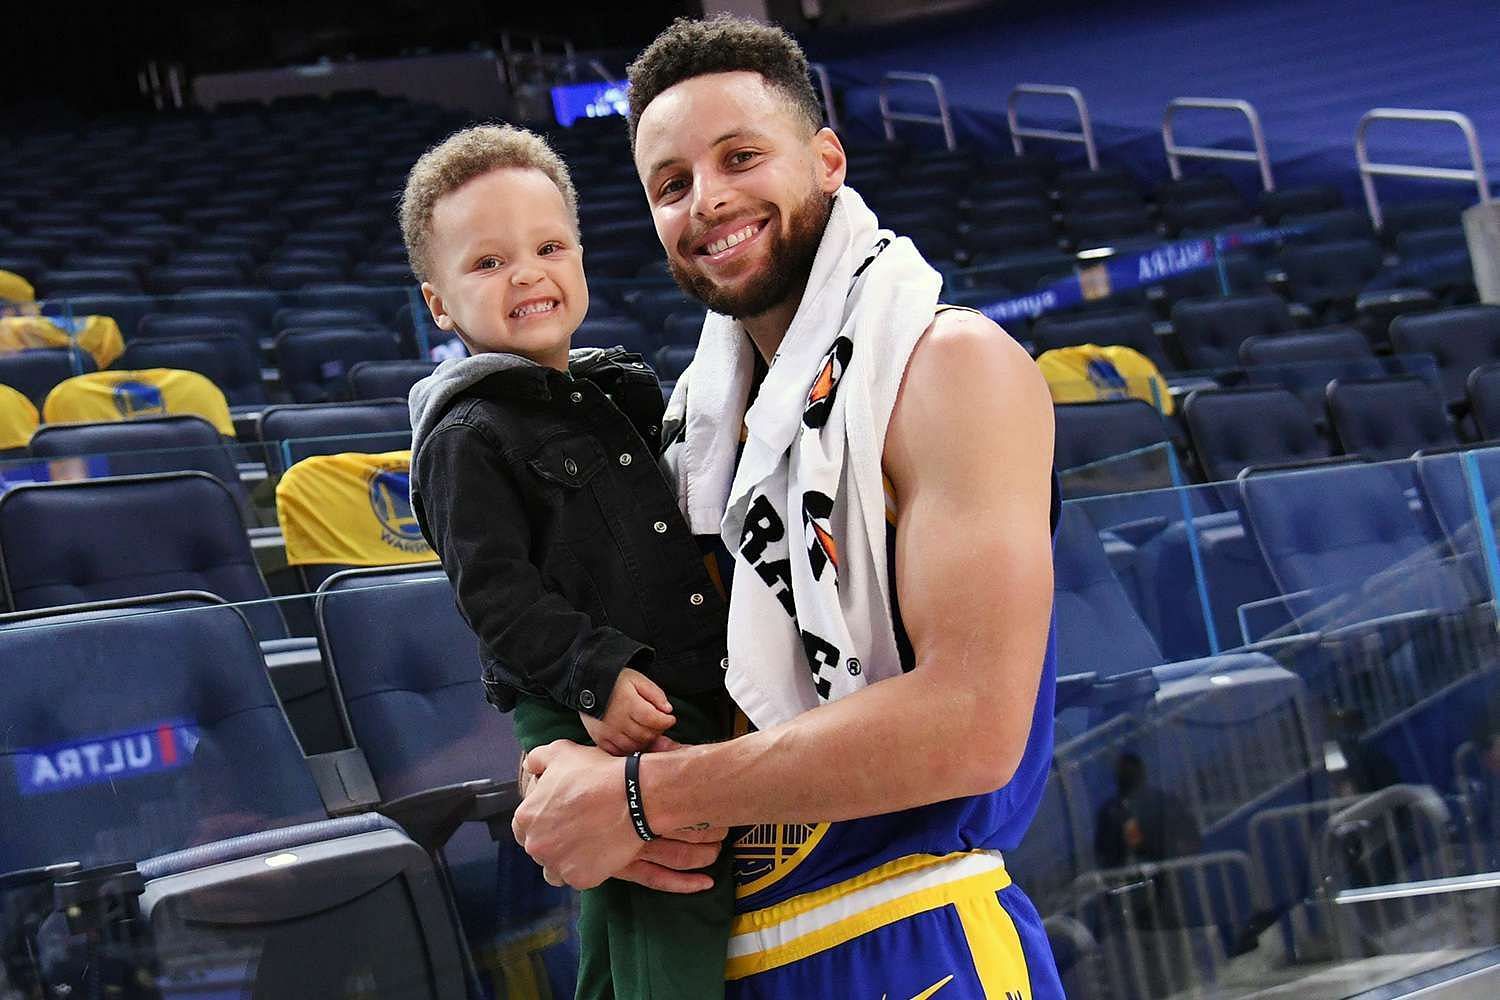 Steph Curry starts to train his son, Canon